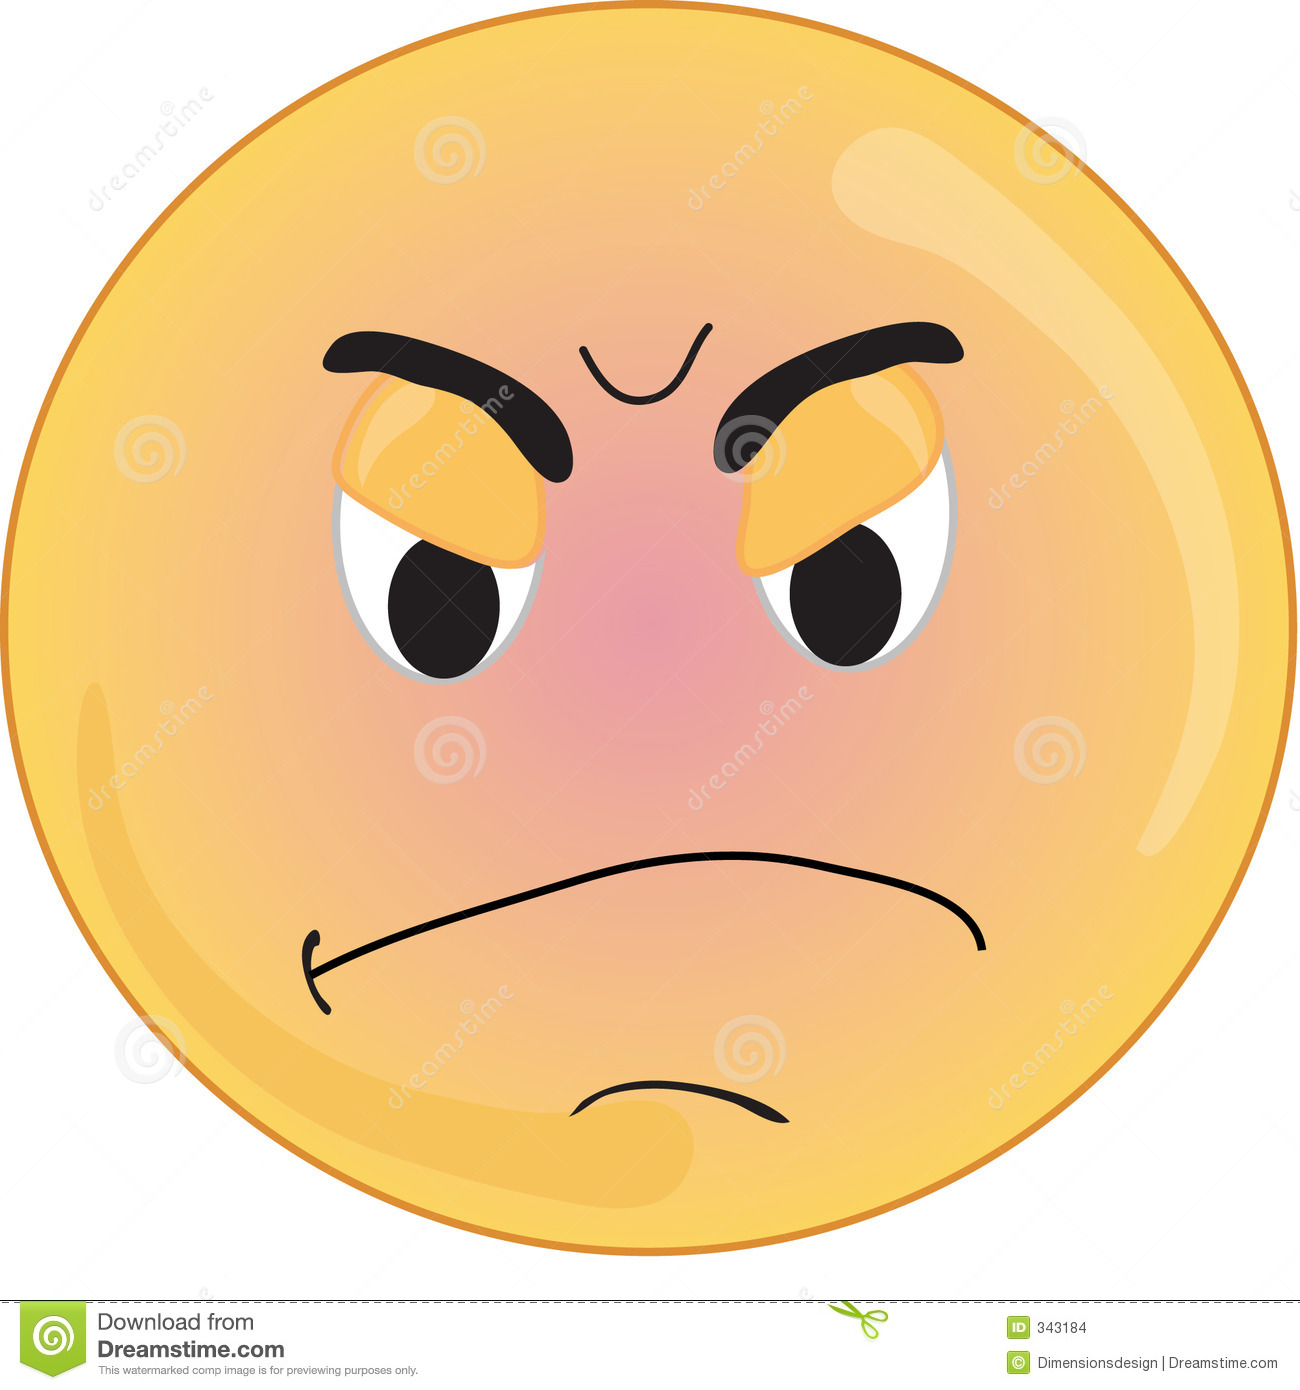 Angry Face Stock Images   Image  343184